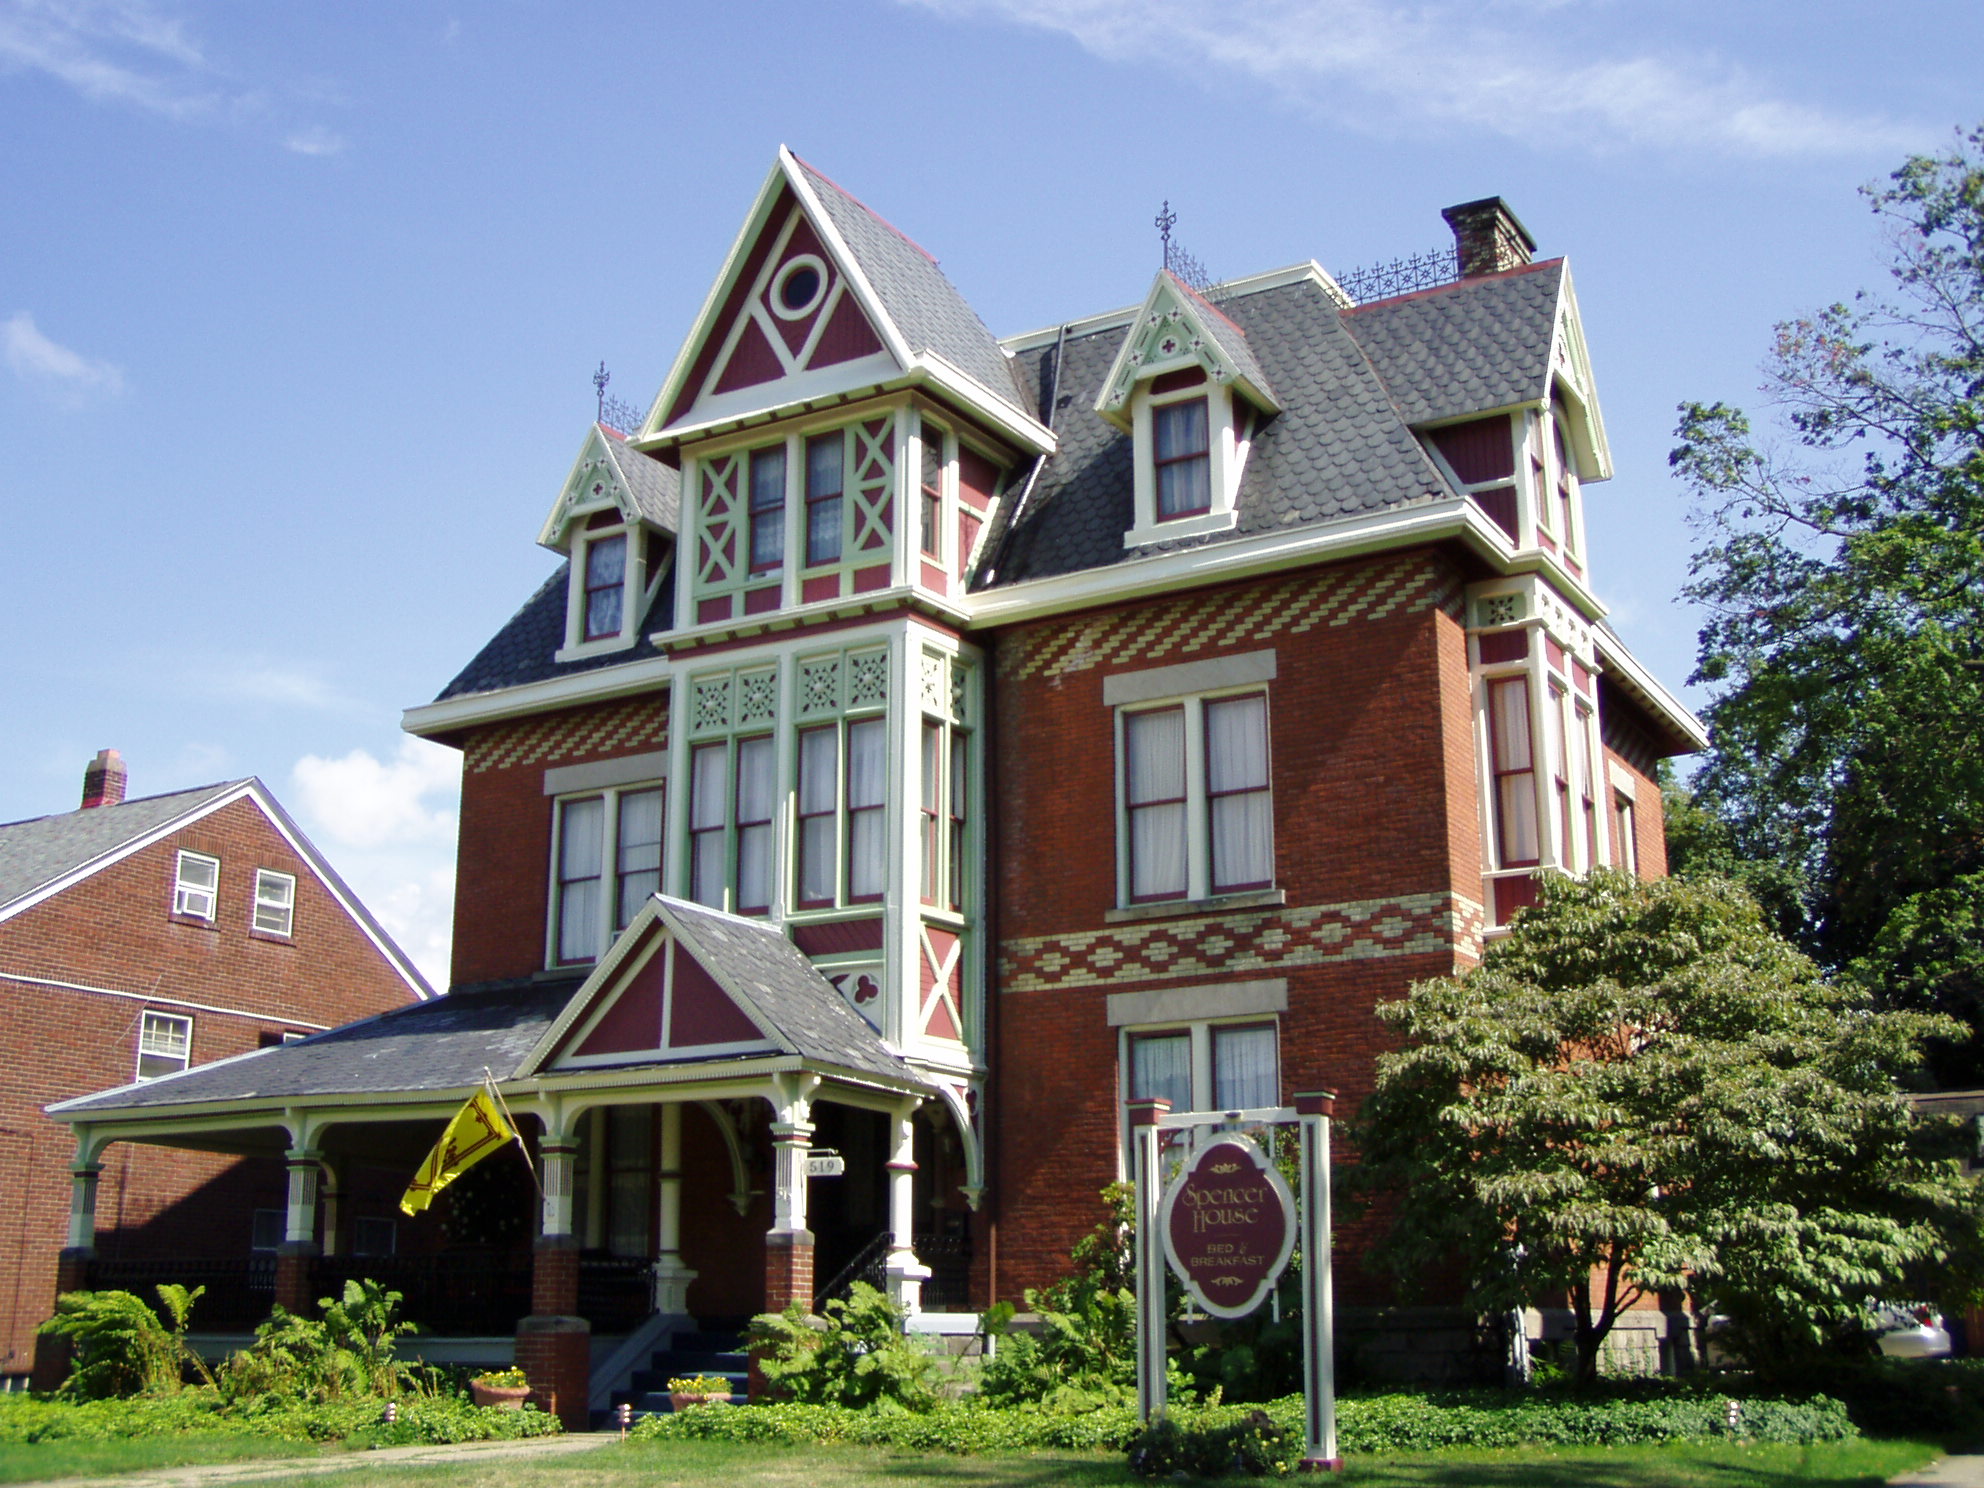 Spencer House Bed & Breakfast 519 W 6th St, Erie, PA 16507 - YP.com